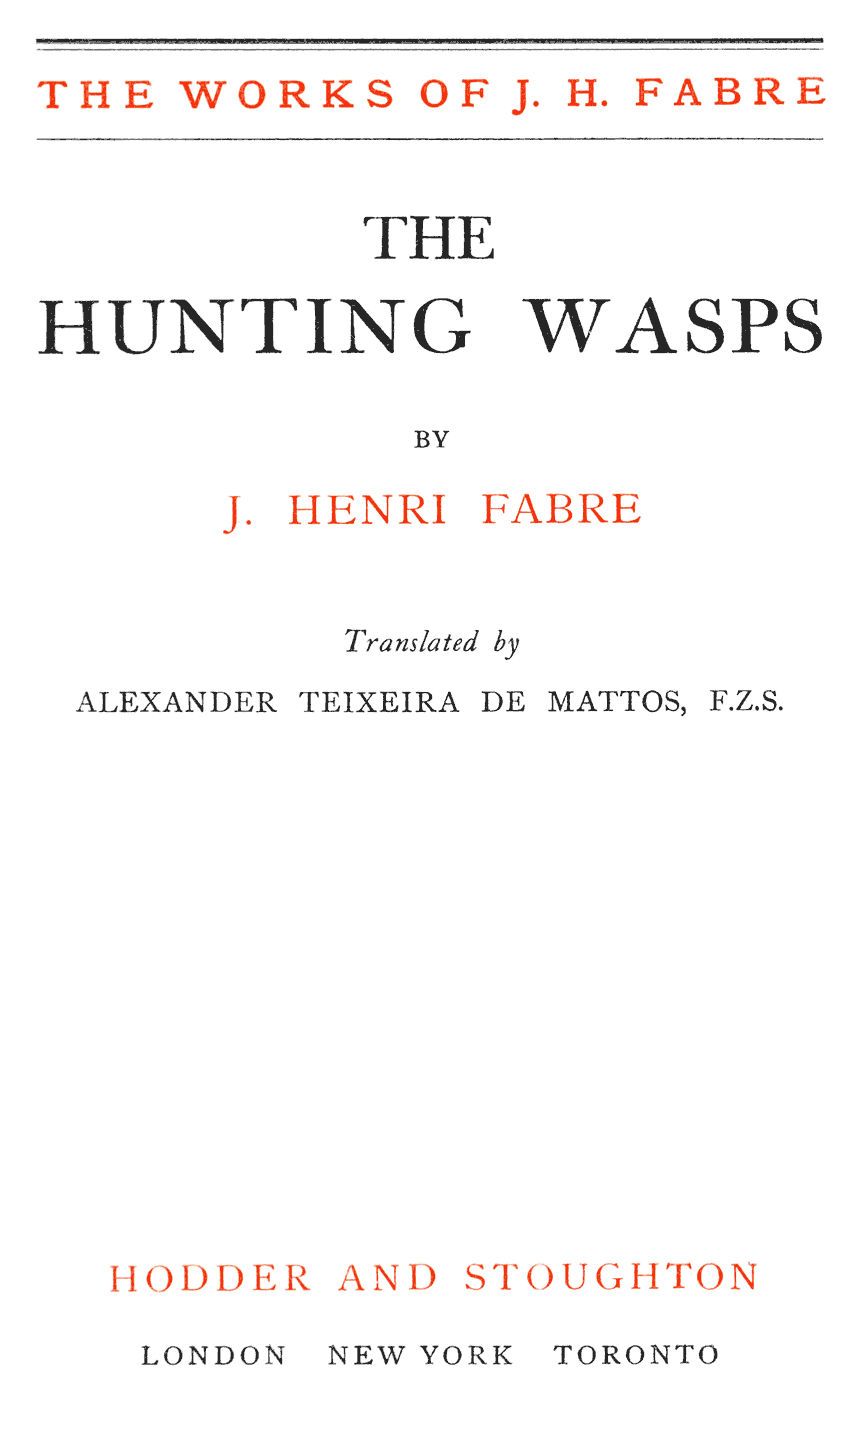 https://www.gutenberg.org/files/67110/67110-h/images/titlepage.png